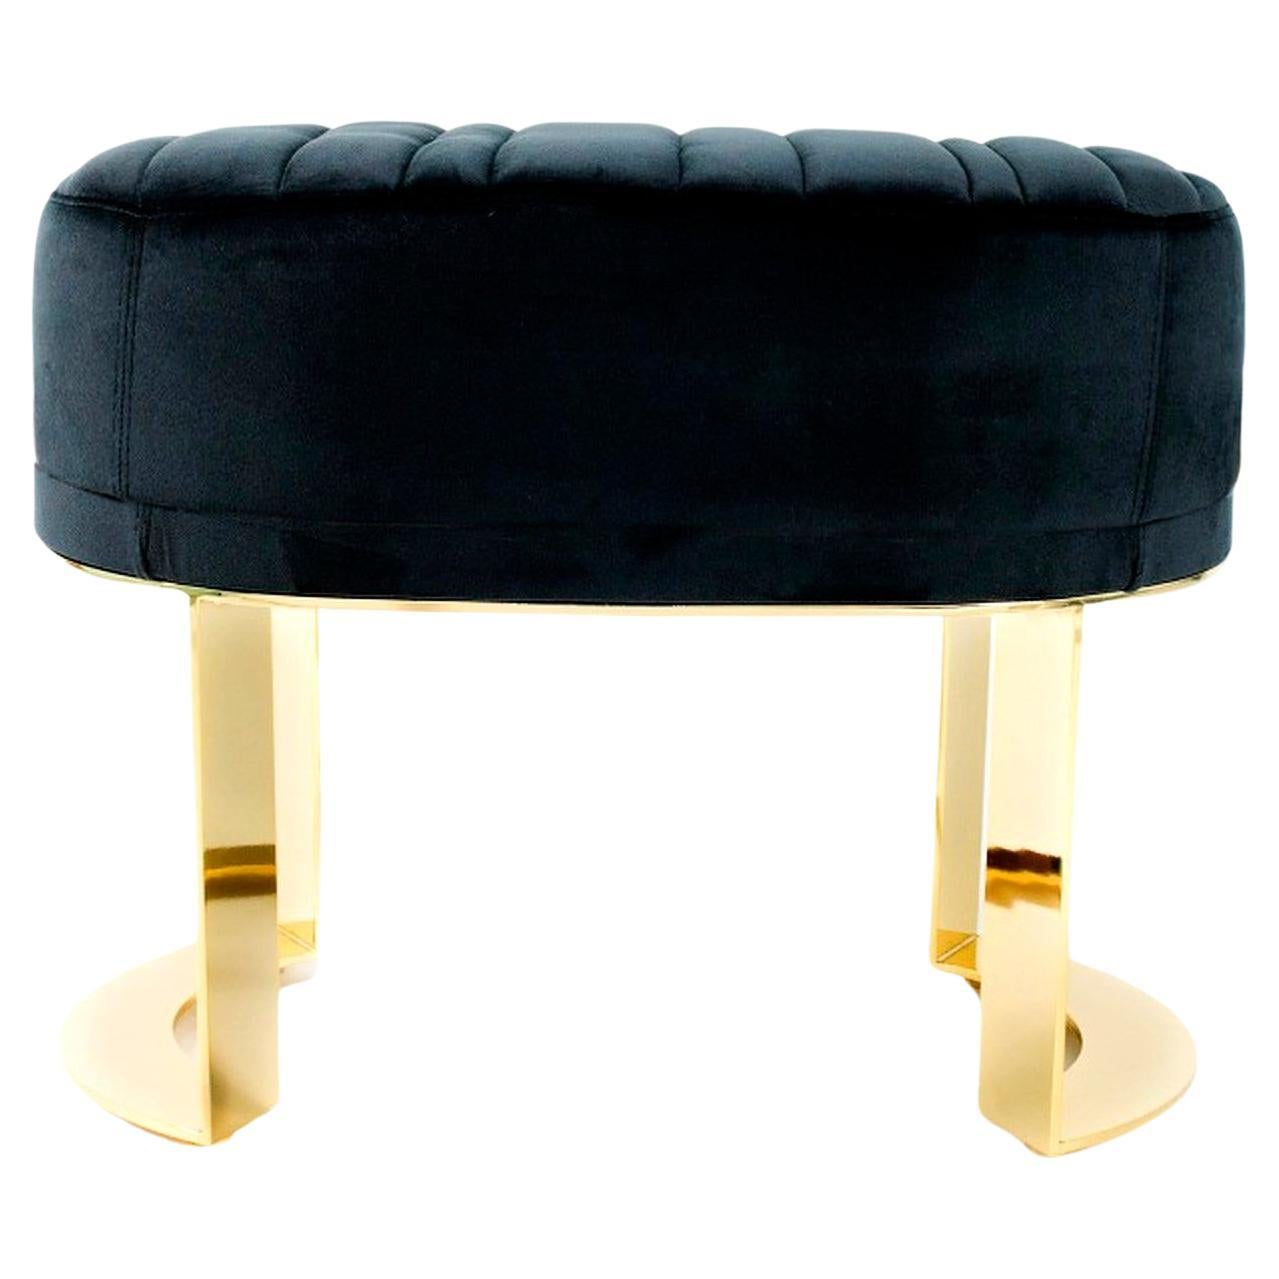 Upholstered Stool, Gold Plated Legs Bench